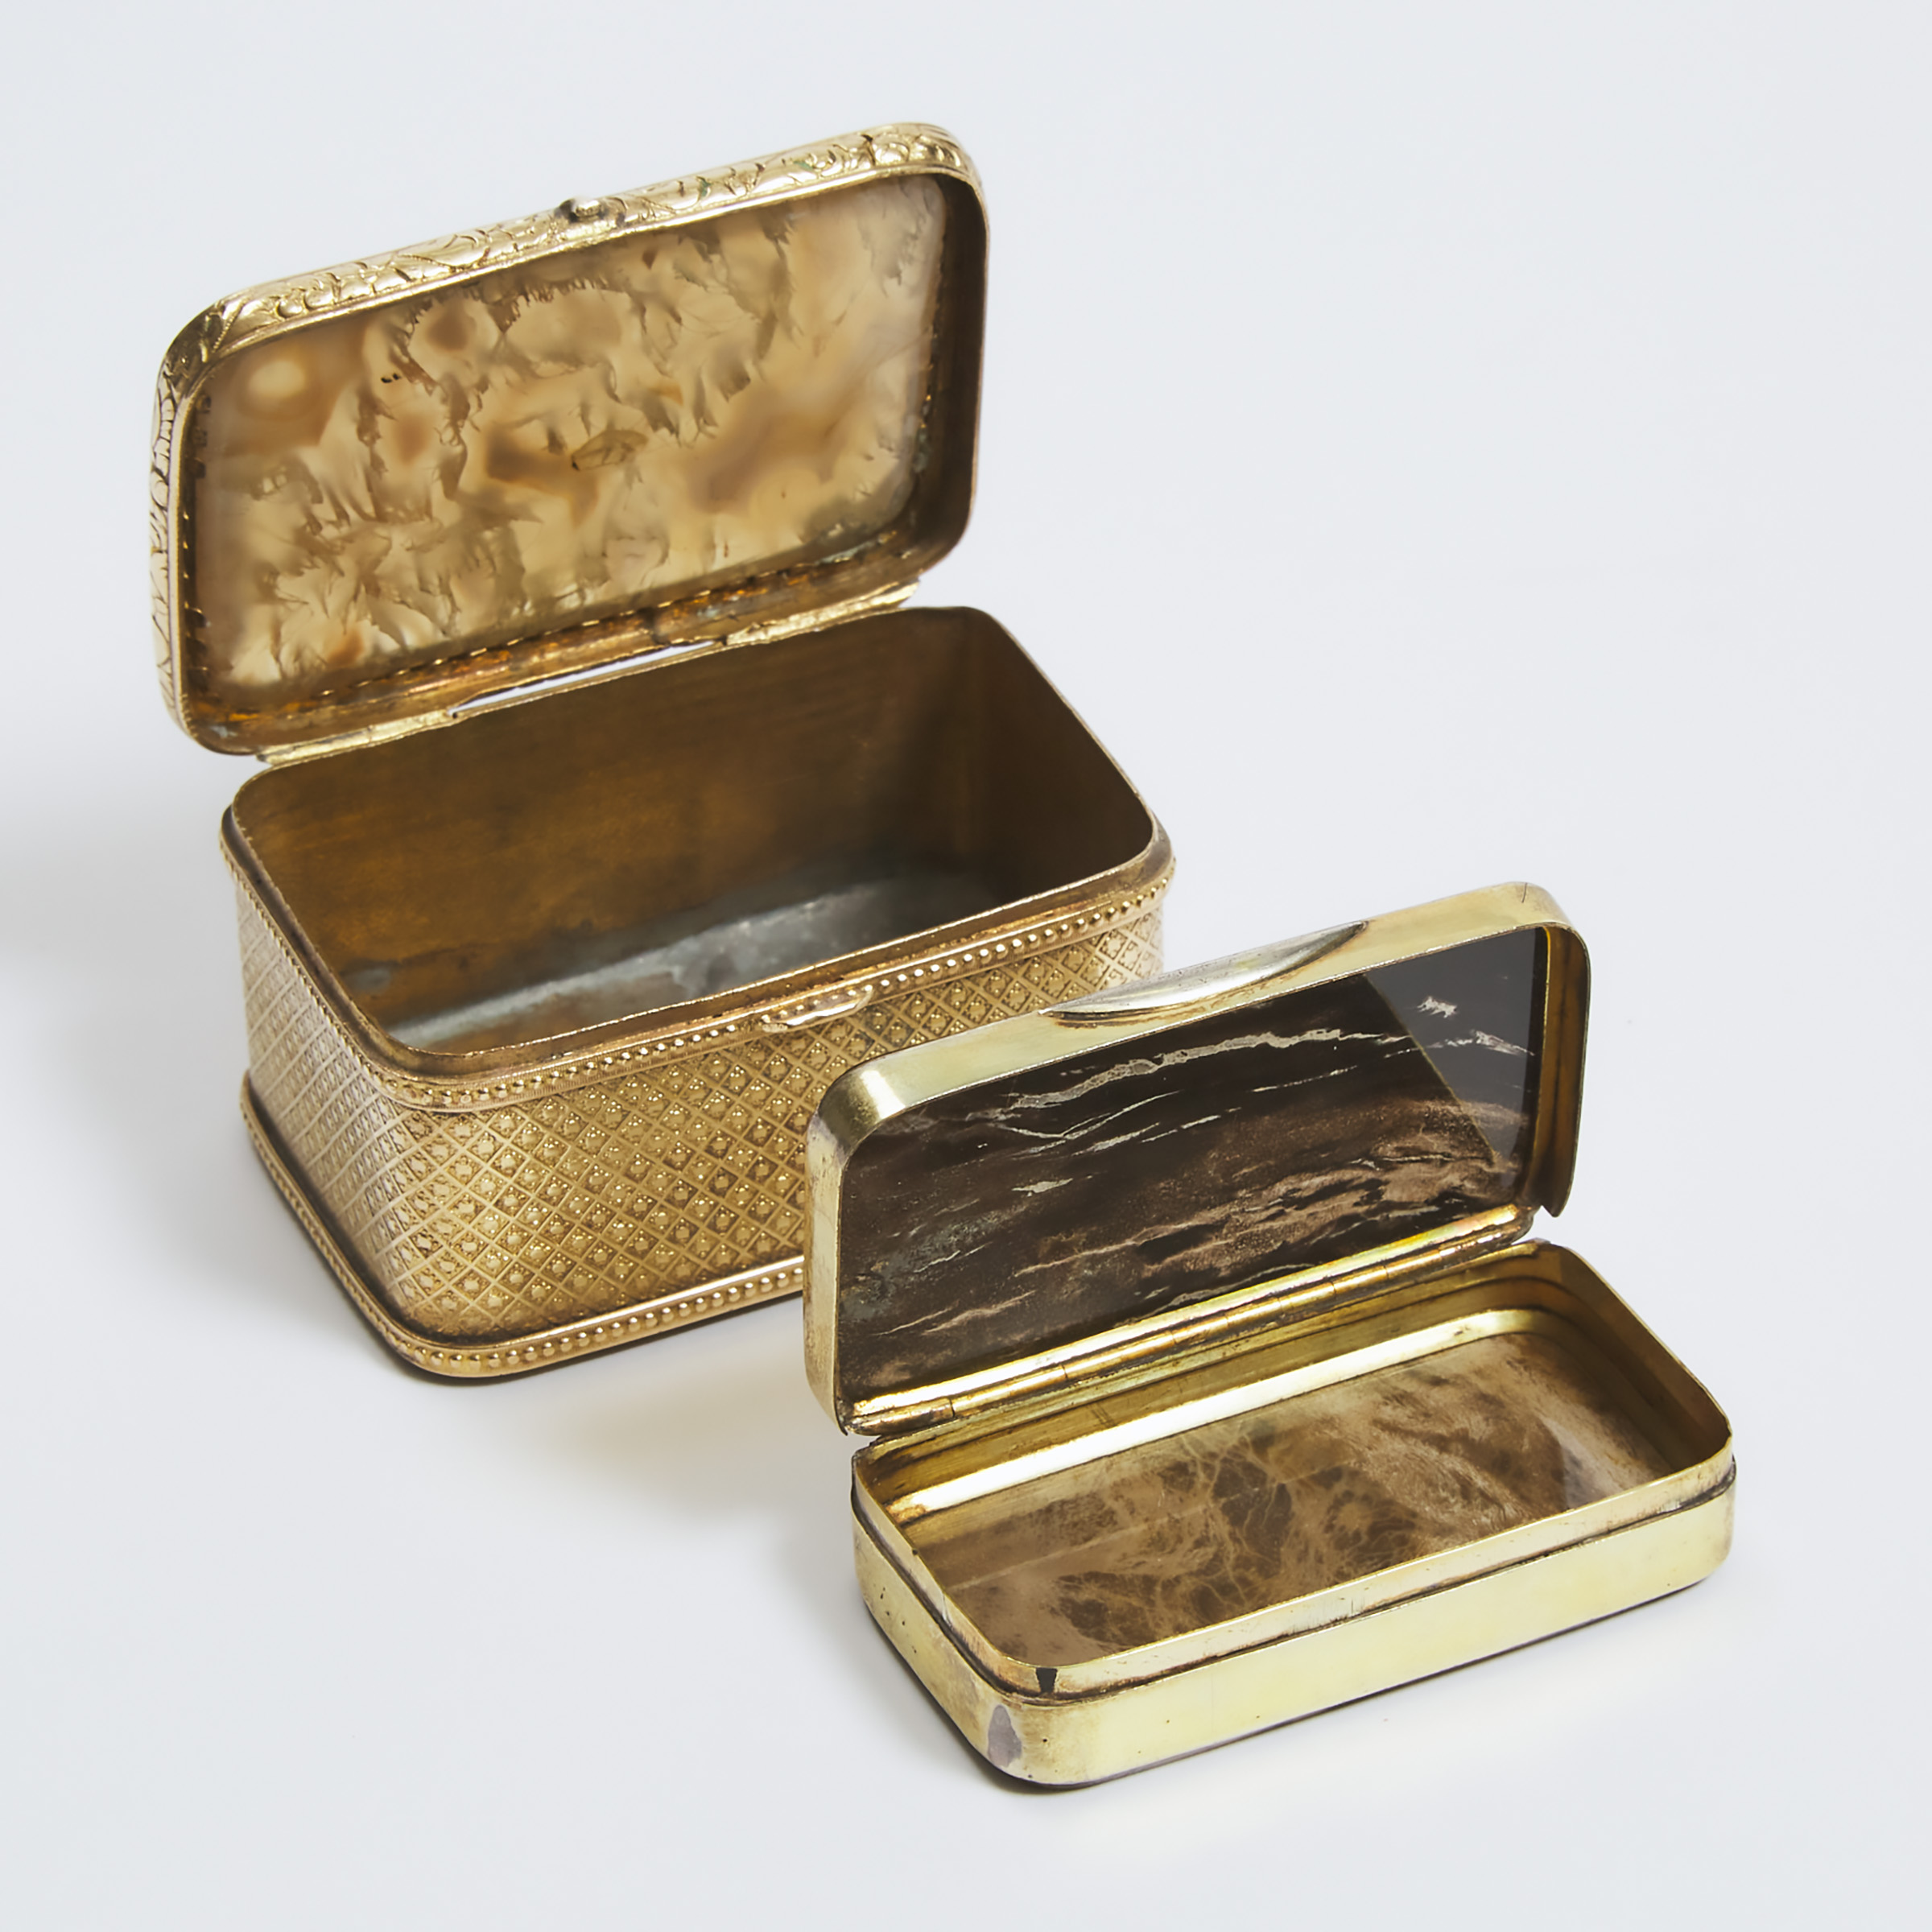 Two Italian Agate Mounted Gilt Metal Dresser Boxes, early 20th century